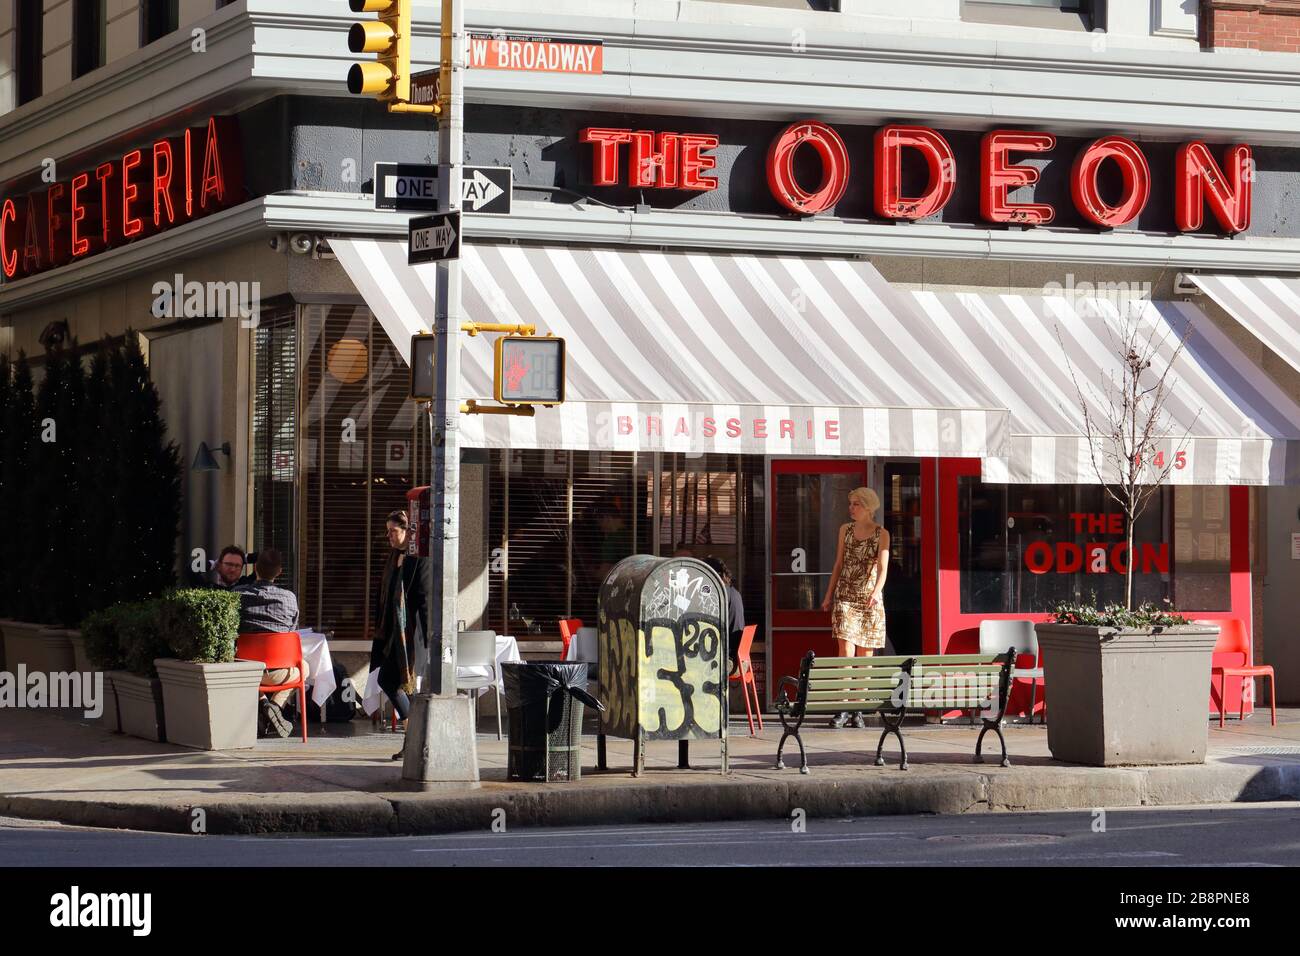 The Odeon, 145 W Broadway, New York. NYC storefront photo of a French American restaurant in the Tribeca neighborhood of Manhattan. Stock Photo